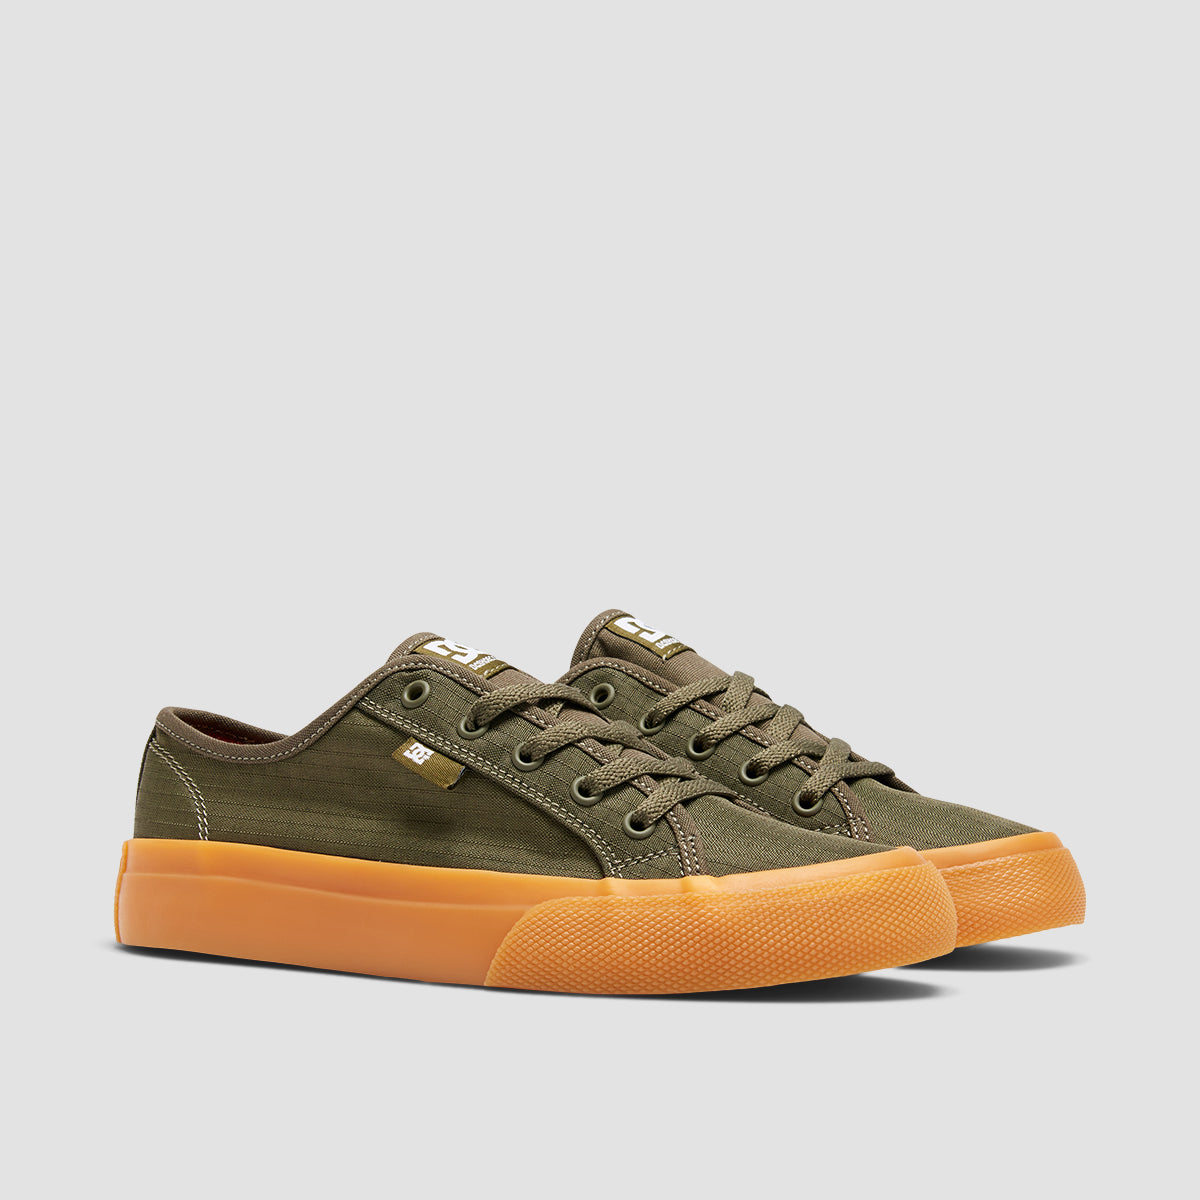 DC Manual Shoes - Dusty Olive - Kids